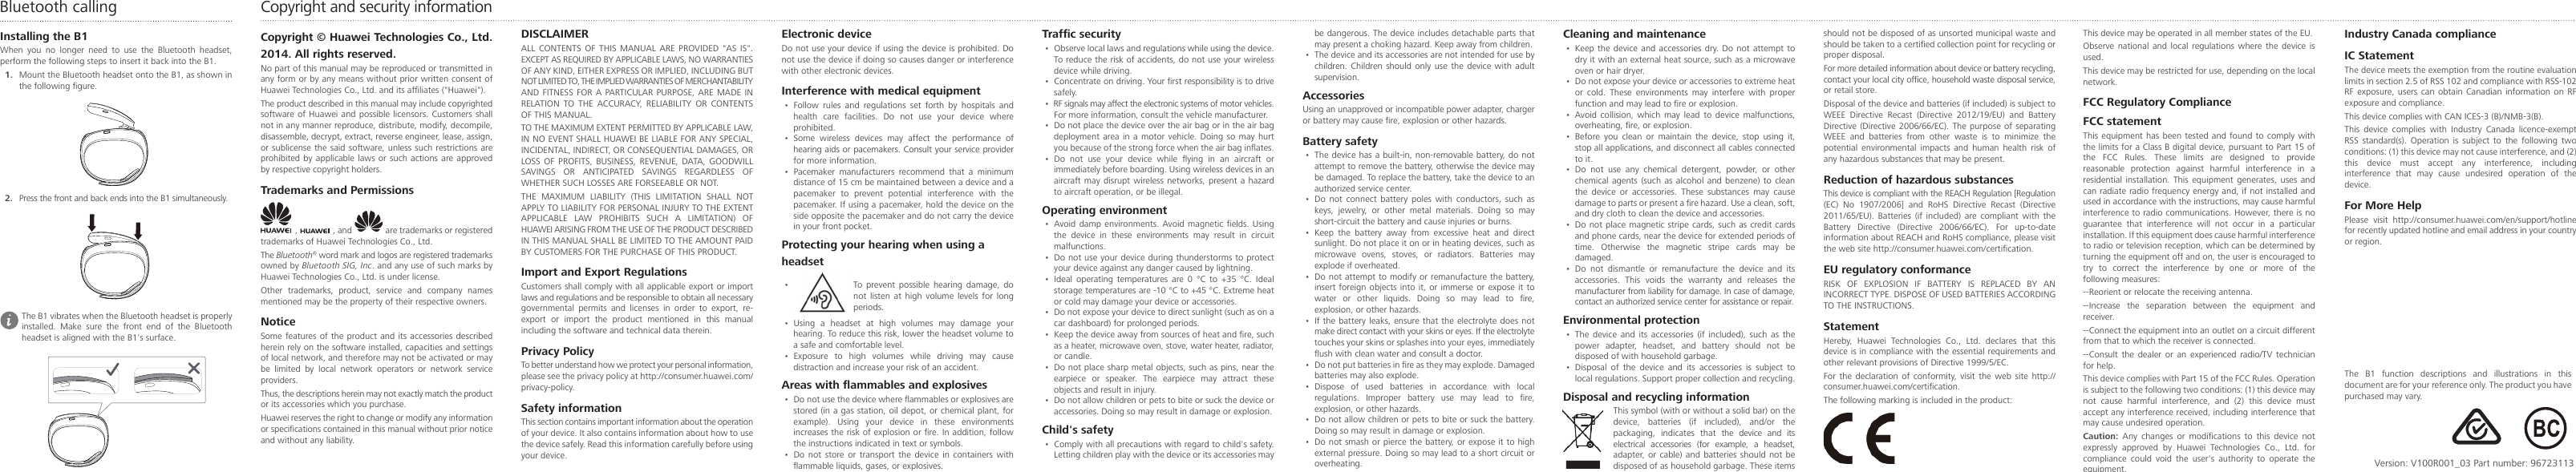 Copyright and security informationCopyright © Huawei Technologies Co., Ltd. 2014. All rights reserved.No part of this manual may be reproduced or transmitted in any form or by any means without prior written consent of Huawei Technologies Co., Ltd. and its afliates (&quot;Huawei&quot;).The product described in this manual may include copyrighted software of Huawei and possible licensors. Customers shall not in any manner reproduce, distribute, modify, decompile, disassemble, decrypt, extract, reverse engineer, lease, assign, or sublicense the said software, unless such restrictions are prohibited by applicable laws or such actions are approved by respective copyright holders.Trademarks and Permissions,   , and   are trademarks or registered trademarks of Huawei Technologies Co., Ltd.The Bluetooth® word mark and logos are registered trademarks owned by Bluetooth SIG, Inc. and any use of such marks by Huawei Technologies Co., Ltd. is under license. Other trademarks, product, service and company names mentioned may be the property of their respective owners.NoticeSome features of the product and its accessories described herein rely on the software installed, capacities and settings of local network, and therefore may not be activated or may be limited by local network operators or network service providers.Thus, the descriptions herein may not exactly match the product or its accessories which you purchase.Huawei reserves the right to change or modify any information or specications contained in this manual without prior notice and without any liability.DISCLAIMERALL CONTENTS OF THIS MANUAL ARE PROVIDED &quot;AS IS&quot;. EXCEPT AS REQUIRED BY APPLICABLE LAWS, NO WARRANTIES OF ANY KIND, EITHER EXPRESS OR IMPLIED, INCLUDING BUT NOT LIMITED TO, THE IMPLIED WARRANTIES OF MERCHANTABILITY AND FITNESS FOR A PARTICULAR PURPOSE, ARE MADE IN RELATION TO THE ACCURACY, RELIABILITY OR CONTENTS OF THIS MANUAL.TO THE MAXIMUM EXTENT PERMITTED BY APPLICABLE LAW, IN NO EVENT SHALL HUAWEI BE LIABLE FOR ANY SPECIAL, INCIDENTAL, INDIRECT, OR CONSEQUENTIAL DAMAGES, OR LOSS OF PROFITS, BUSINESS, REVENUE, DATA, GOODWILL SAVINGS OR ANTICIPATED SAVINGS REGARDLESS OF WHETHER SUCH LOSSES ARE FORSEEABLE OR NOT.THE  MAXIMUM  LIABILITY  (THIS  LIMITATION  SHALL  NOT APPLY TO LIABILITY FOR PERSONAL INJURY TO THE EXTENT APPLICABLE  LAW  PROHIBITS  SUCH  A  LIMITATION)  OF HUAWEI ARISING FROM THE USE OF THE PRODUCT DESCRIBED IN THIS MANUAL SHALL BE LIMITED TO THE AMOUNT PAID BY CUSTOMERS FOR THE PURCHASE OF THIS PRODUCT.Import and Export RegulationsCustomers shall comply with all applicable export or import laws and regulations and be responsible to obtain all necessary governmental  permits  and  licenses  in  order  to  export,  re-export or import the product mentioned in this manual including the software and technical data therein.Privacy PolicyTo better understand how we protect your personal information, please see the privacy policy at http://consumer.huawei.com/privacy-policy.Safety informationThis section contains important information about the operation of your device. It also contains information about how to use the device safely. Read this information carefully before using your device.Electronic deviceDo not use your device if using the device is prohibited. Do not use the device if doing so causes danger or interference with other electronic devices.Interference with medical equipment•  Follow rules and regulations set forth by hospitals and health care facilities. Do not use your device where prohibited.•  Some wireless devices may affect the performance of hearing aids or pacemakers. Consult your service provider for more information.•  Pacemaker manufacturers recommend that a minimum distance of 15 cm be maintained between a device and a pacemaker to prevent potential interference with the pacemaker. If using a pacemaker, hold the device on the side opposite the pacemaker and do not carry the device in your front pocket.Protecting your hearing when using a headset•  To prevent possible hearing damage, do not listen at high volume levels for long periods.•  Using a headset at high volumes may damage your hearing. To reduce this risk, lower the headset volume to a safe and comfortable level.•  Exposure to high volumes while driving may cause distraction and increase your risk of an accident.Areas with ammables and explosives•  Do not use the device where ammables or explosives are stored (in a gas station, oil depot, or chemical plant, for example).  Using  your  device  in  these  environments increases the risk of explosion or re. In addition, follow the instructions indicated in text or symbols.•  Do not store or transport the device in containers with ammable liquids, gases, or explosives.Trafc security•  Observe local laws and regulations while using the device. To reduce the risk of accidents, do not use your wireless device while driving.•  Concentrate on driving. Your rst responsibility is to drive safely.•  RF signals may affect the electronic systems of motor vehicles. For more information, consult the vehicle manufacturer.•  Do not place the device over the air bag or in the air bag deployment area in a motor vehicle. Doing so may hurt you because of the strong force when the air bag inates.•  Do  not  use  your  device  while  ying  in  an  aircraft  or immediately before boarding. Using wireless devices in an aircraft may disrupt  wireless networks, present  a hazard to aircraft operation, or be illegal.Operating environment•  Avoid  damp  environments.  Avoid  magnetic  elds.  Using the device in these environments may result in circuit malfunctions.•  Do not use your device during thunderstorms to protect your device against any danger caused by lightning. •  Ideal operating temperatures are 0 °C to +35 °C. Ideal storage temperatures are -10 °C to +45 °C. Extreme heat or cold may damage your device or accessories.•  Do not expose your device to direct sunlight (such as on a car dashboard) for prolonged periods. •  Keep the device away from sources of heat and re, such as a heater, microwave oven, stove, water heater, radiator, or candle.•  Do not place sharp metal objects, such as pins, near the earpiece or speaker. The earpiece may attract these objects and result in injury.•  Do not allow children or pets to bite or suck the device or accessories. Doing so may result in damage or explosion.Child&apos;s safety •  Comply with all precautions with regard to child&apos;s safety. Letting children play with the device or its accessories may be dangerous. The device includes detachable parts that may present a choking hazard. Keep away from children.•  The device and its accessories are not intended for use by children. Children should only use the device with adult supervision.AccessoriesUsing an unapproved or incompatible power adapter, charger or battery may cause re, explosion or other hazards.Battery safety•  The device has a built-in, non-removable battery, do not attempt to remove the battery, otherwise the device may be damaged. To replace the battery, take the device to an authorized service center.•  Do not connect battery poles with conductors, such as keys, jewelry, or other metal materials. Doing so may short-circuit the battery and cause injuries or burns.•  Keep the battery away from excessive heat and direct sunlight. Do not place it on or in heating devices, such as microwave ovens, stoves, or radiators. Batteries may explode if overheated.•  Do not attempt to modify or remanufacture the battery, insert foreign objects into it, or immerse or expose it to water  or  other  liquids.  Doing  so  may  lead  to  re, explosion, or other hazards.•  If the battery leaks, ensure that the electrolyte does not make direct contact with your skins or eyes. If the electrolyte touches your skins or splashes into your eyes, immediately ush with clean water and consult a doctor.•  Do not put batteries in re as they may explode. Damaged batteries may also explode.•  Dispose of used batteries in accordance with local regulations.  Improper  battery  use  may  lead  to  re, explosion, or other hazards.•  Do not allow children or pets to bite or suck the battery. Doing so may result in damage or explosion.•  Do not smash or pierce the battery, or expose it to high external pressure. Doing so may lead to a short circuit or overheating. Cleaning and maintenance•  Keep the device and accessories dry. Do not attempt to dry it with an external heat source, such as a microwave oven or hair dryer. •  Do not expose your device or accessories to extreme heat or cold. These environments may interfere with proper function and may lead to re or explosion.•  Avoid collision, which may lead to device malfunctions, overheating, re, or explosion. •  Before you clean or maintain the device, stop using it, stop all applications, and disconnect all cables connected to it.•  Do not use any chemical detergent, powder, or other chemical agents  (such  as alcohol  and  benzene)  to clean the device or accessories. These substances may cause damage to parts or present a re hazard. Use a clean, soft, and dry cloth to clean the device and accessories.•  Do not place magnetic stripe cards, such as credit cards and phone cards, near the device for extended periods of time. Otherwise the magnetic stripe cards may be damaged.•  Do not dismantle or remanufacture the device and its accessories. This voids the warranty and releases the manufacturer from liability for damage. In case of damage, contact an authorized service center for assistance or repair.Environmental protection•  The device  and  its  accessories  (if  included),  such  as  the power adapter, headset, and battery should not be disposed of with household garbage.•  Disposal of the device and its accessories is subject to local regulations. Support proper collection and recycling.Disposal and recycling informationThis symbol (with or without a solid bar) on the device,  batteries  (if  included),  and/or  the packaging, indicates that the device and its electrical  accessories  (for  example,  a  headset, adapter, or  cable) and  batteries  should not  be disposed of as household garbage. These items should not be disposed of as unsorted municipal waste and should be taken to a certied collection point for recycling or proper disposal.For more detailed information about device or battery recycling, contact your local city ofce, household waste disposal service, or retail store.Disposal of the device and batteries (if included) is subject to WEEE  Directive  Recast  (Directive  2012/19/EU)  and  Battery Directive (Directive 2006/66/EC).  The purpose  of separating WEEE  and  batteries  from  other  waste  is  to  minimize  the potential environmental impacts and human health risk of any hazardous substances that may be present.Reduction of hazardous substancesThis device is compliant with the REACH Regulation [Regulation (EC)  No  1907/2006]  and  RoHS  Directive  Recast  (Directive 2011/65/EU).  Batteries  (if  included)  are  compliant  with  the Battery  Directive  (Directive  2006/66/EC).  For  up-to-date information about REACH and RoHS compliance, please visit the web site http://consumer.huawei.com/certication.EU regulatory conformanceRISK OF EXPLOSION IF BATTERY IS REPLACED BY AN INCORRECT TYPE. DISPOSE OF USED BATTERIES ACCORDING TO THE INSTRUCTIONS.StatementHereby, Huawei Technologies Co., Ltd. declares that this device is in compliance with the essential requirements and other relevant provisions of Directive 1999/5/EC. For the declaration of conformity, visit the web site http://consumer.huawei.com/certication.The following marking is included in the product:This device may be operated in all member states of the EU.Observe national and local regulations where the device is used.This device may be restricted for use, depending on the local network.FCC Regulatory ComplianceFCC statementThis equipment has been tested and found to comply with the limits for a Class B digital device, pursuant to Part 15 of the FCC Rules. These limits are designed to provide reasonable protection against harmful interference in a residential installation. This equipment generates, uses and can radiate radio frequency energy and, if not installed and used in accordance with the instructions, may cause harmful interference to radio communications. However, there is no guarantee that interference will not occur in a particular installation. If this equipment does cause harmful interference to radio or television reception, which can be determined by turning the equipment off and on, the user is encouraged to try to correct the interference by one or more of the following measures:--Reorient or relocate the receiving antenna.--Increase  the  separation  between  the  equipment  and receiver.--Connect the equipment into an outlet on a circuit different from that to which the receiver is connected.--Consult  the  dealer  or  an  experienced  radio/TV  technician for help.This device complies with Part 15 of the FCC Rules. Operation is subject to the following two conditions: (1) this device may not  cause  harmful  interference,  and  (2)  this  device  must accept any interference received, including interference that may cause undesired operation.Caution:  Any  changes  or  modications  to  this  device  not expressly approved by Huawei Technologies Co., Ltd. for compliance could void the user&apos;s authority to operate the equipment. Version: V100R001_03 Part number: 96723113Installing the B1When you no longer need to use the Bluetooth headset, perform the following steps to insert it back into the B1. 1.  Mount the Bluetooth headset onto the B1, as shown in the following gure.2.  Press the front and back ends into the B1 simultaneously.   The B1 vibrates when the Bluetooth headset is properly installed. Make sure the front end of the Bluetooth headset is aligned with the B1&apos;s surface.Bluetooth callingThe B1 function descriptions and illustrations in this document are for your reference only. The product you have purchased may vary.Industry Canada complianceIC StatementThe device meets the exemption from the routine evaluation limits in section 2.5 of RSS 102 and compliance with RSS-102 RF exposure, users can obtain Canadian information on RF exposure and compliance.This device complies with CAN ICES-3 (B)/NMB-3(B).This  device  complies  with  Industry  Canada  licence-exempt RSS  standard(s).  Operation  is  subject  to  the  following  two conditions: (1) this device may not cause interference, and (2) this device must accept any interference, including interference that may cause undesired operation of the device.For More HelpPlease visit http://consumer.huawei.com/en/support/hotline for recently updated hotline and email address in your country or region.